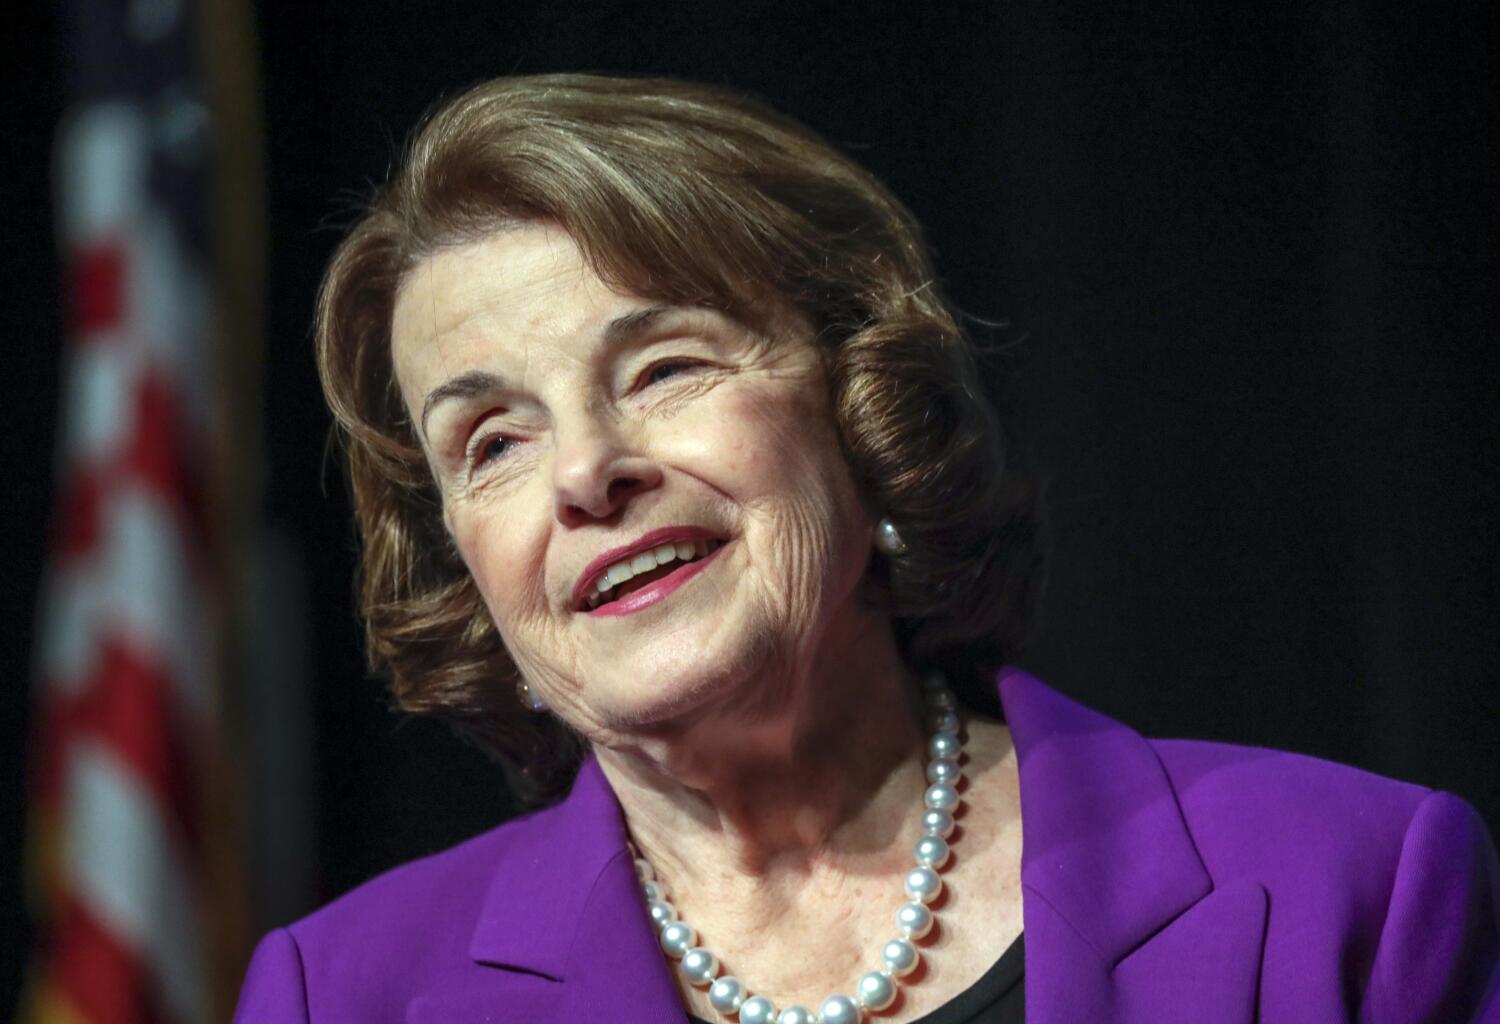 Column: Feinstein's stubbornness kept her in office too long. But it also defined her success